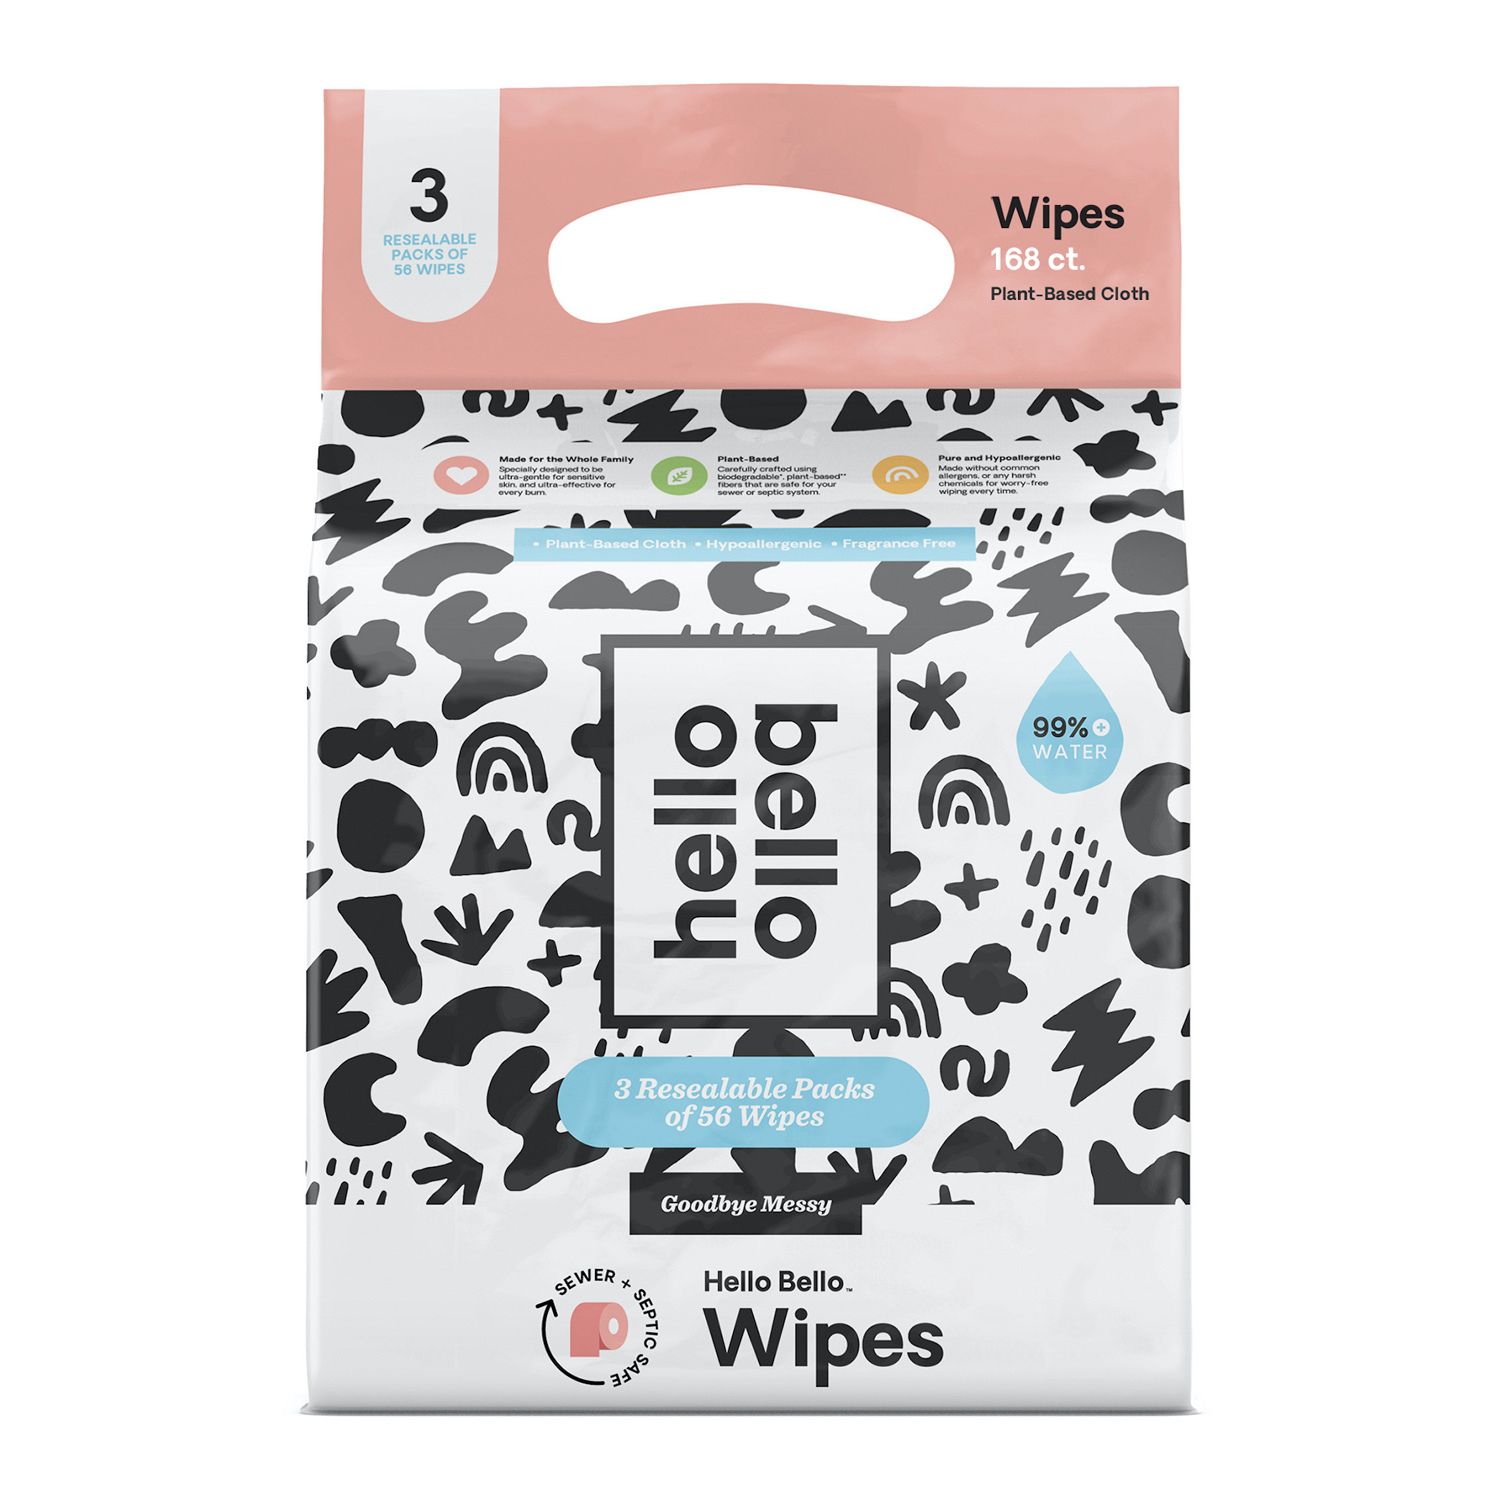 Image for Hello Bello Flushable Wipes 3-Pack at Kohl's.